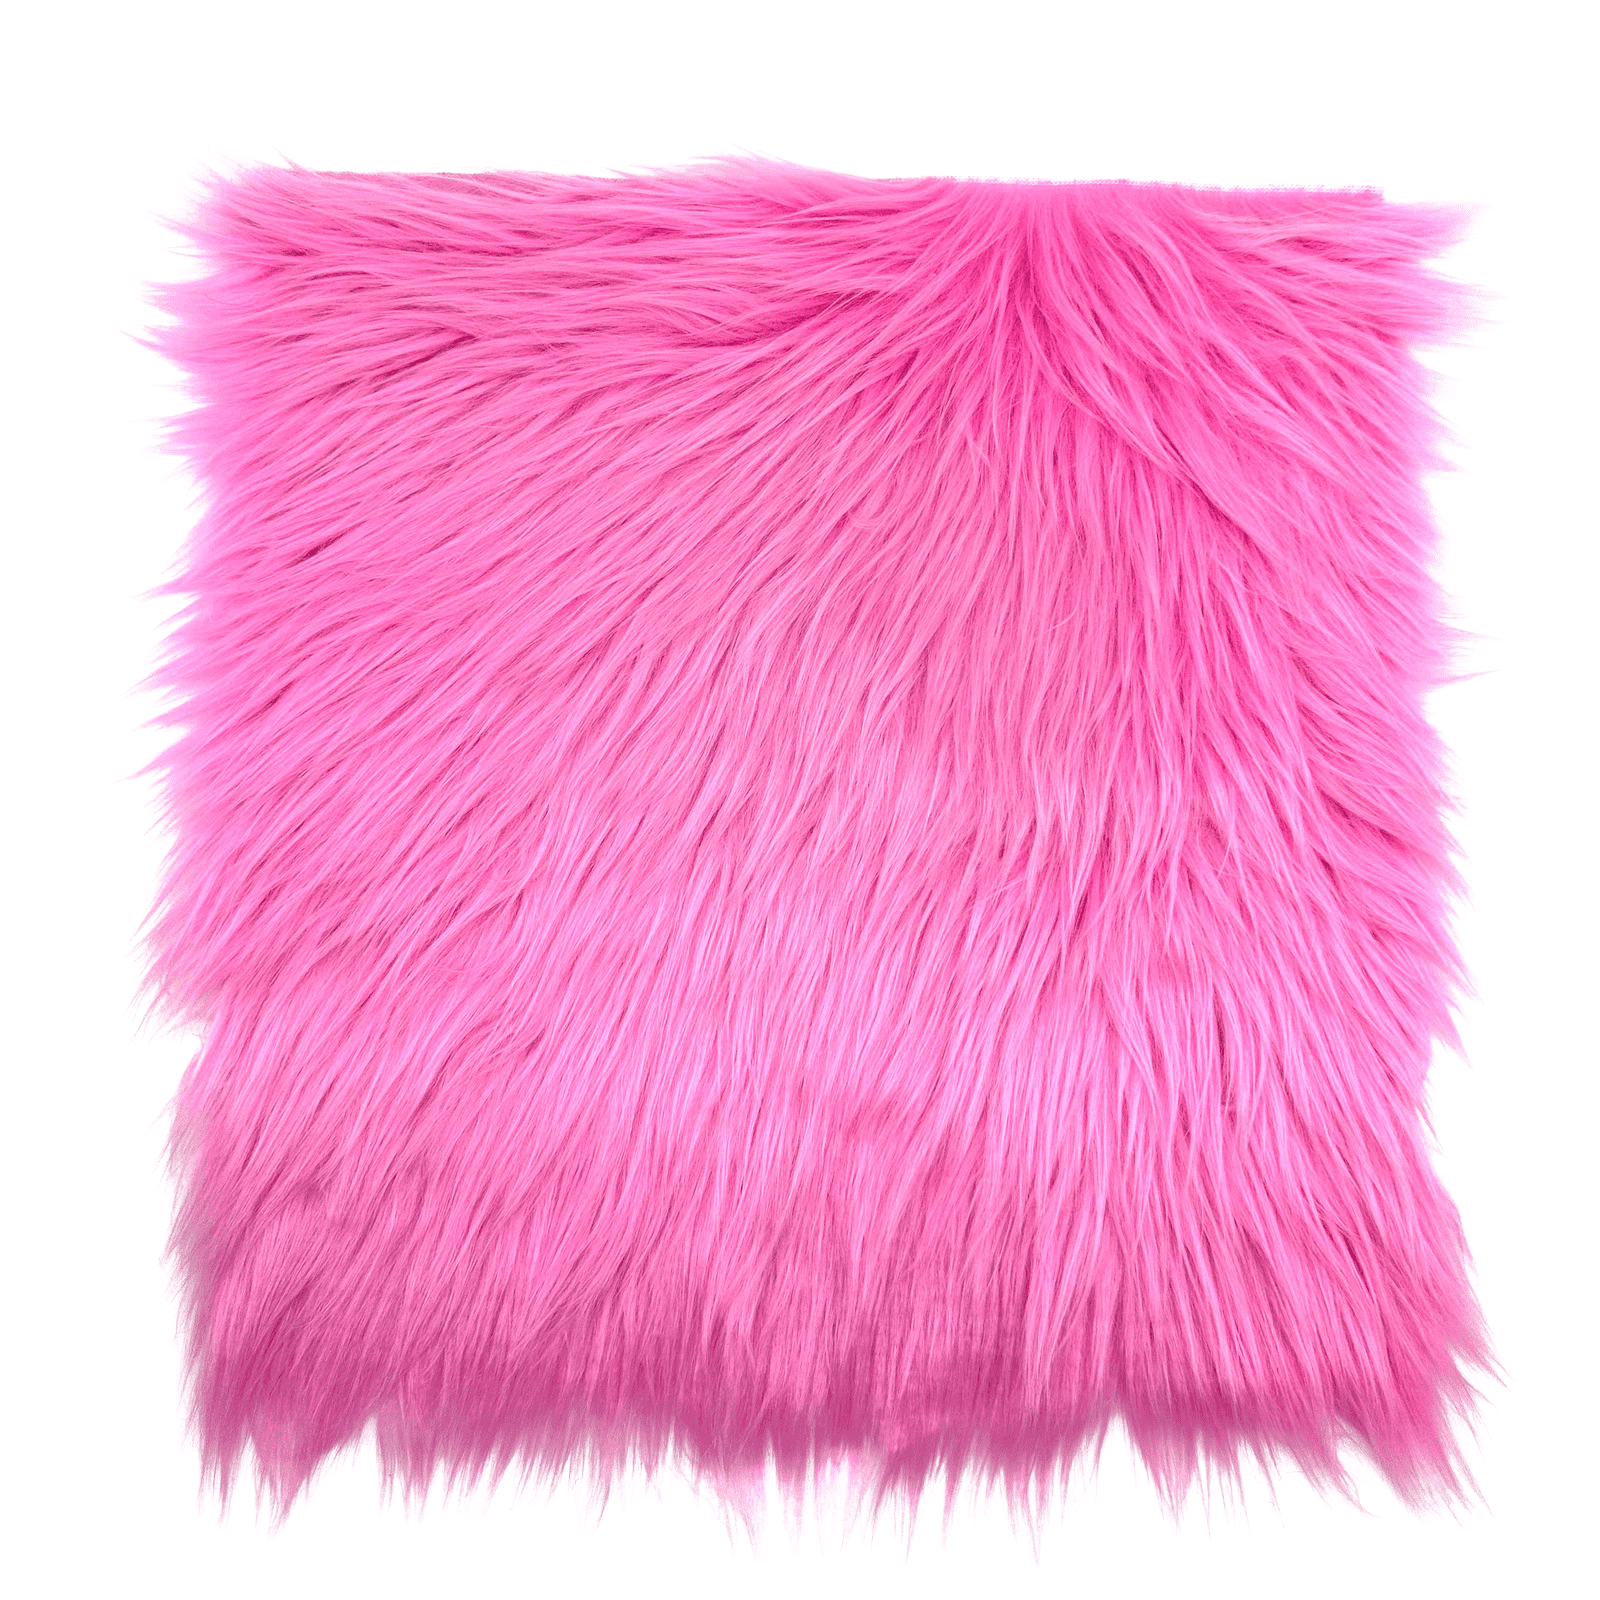 Ice Fabrics Faux Fur Fabric Squares - 10x10 Inches Pre-Cut Craft Fur Fabric  - Shaggy Mohair Fabric for Costumes, Apparel, Rugs, Pillows, Decorations  and More - Bubble Gum Fur Fabric 